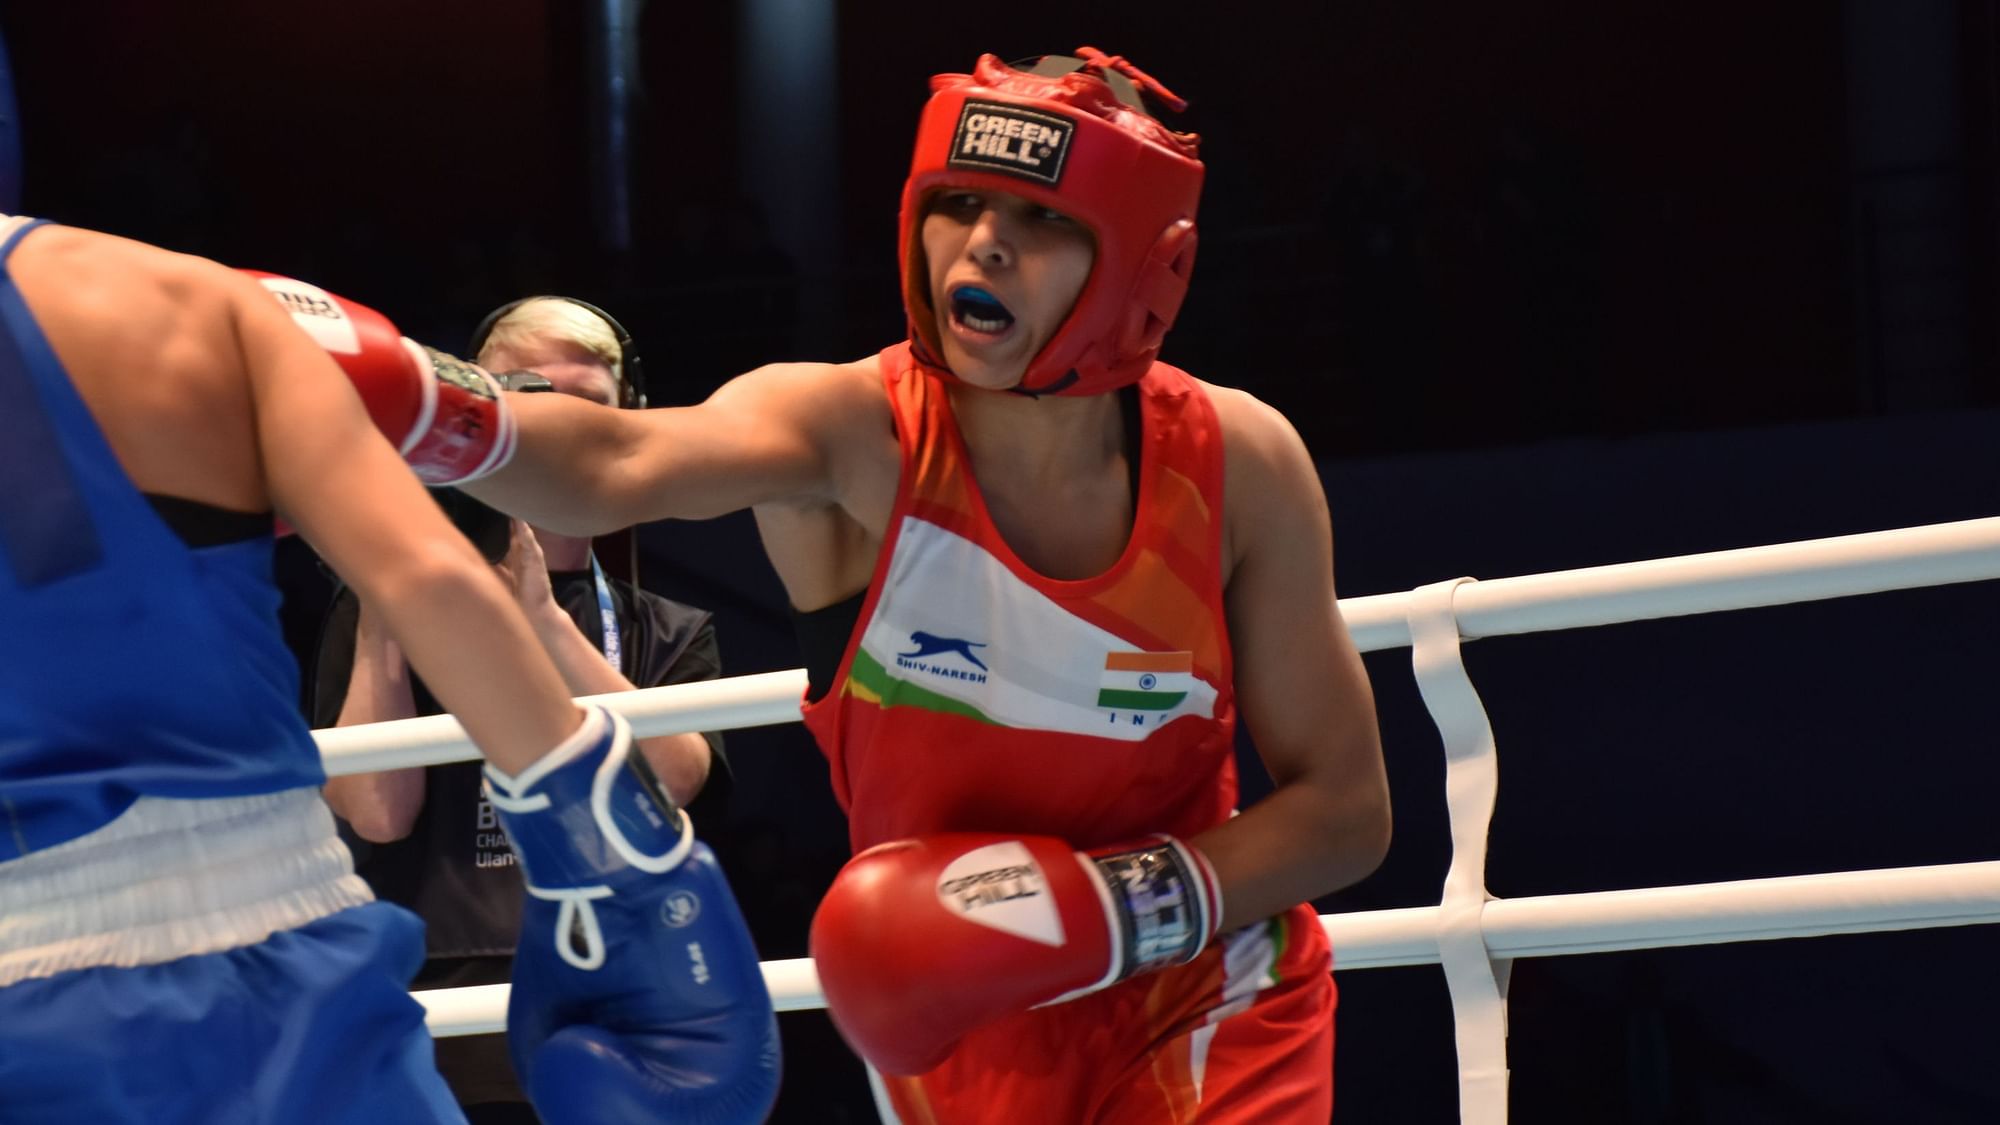 Manju Rani from Haryana’s Rithal village made a dream run in her maiden World Boxing Championships to enter the final.